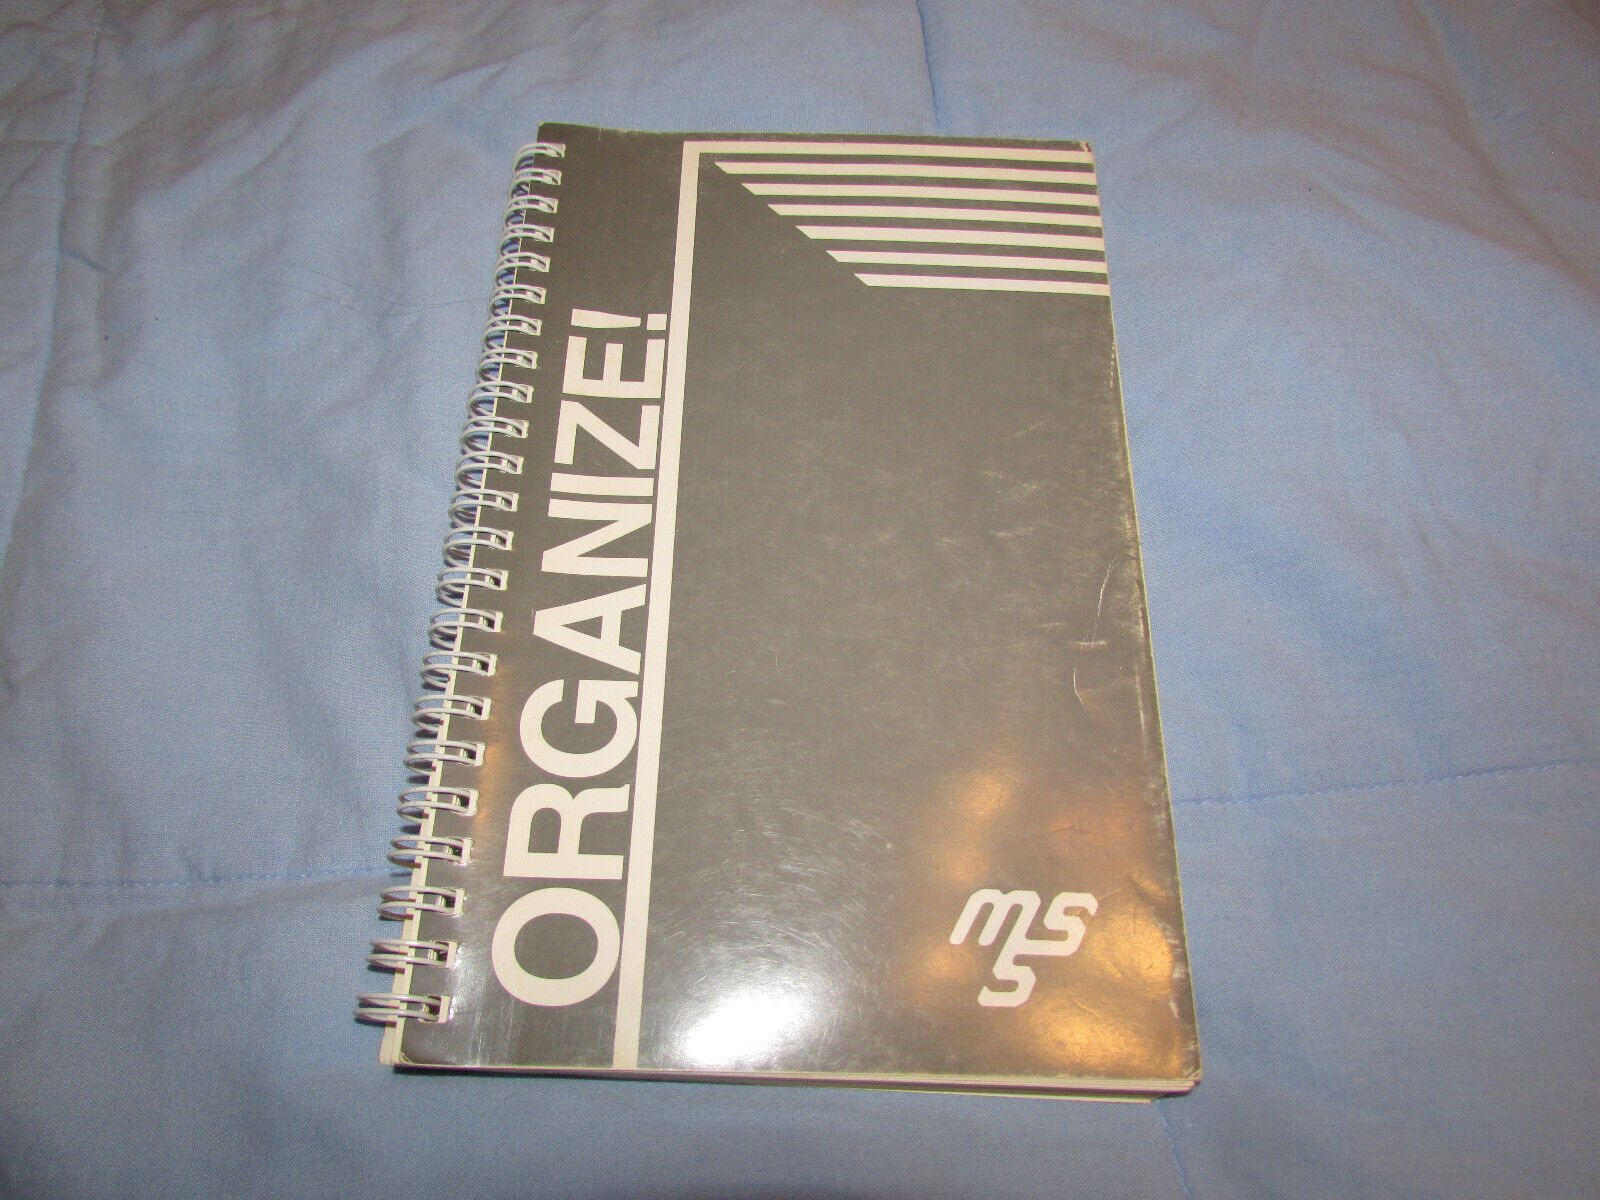 Organize Owners Manual - For Amiga - Micro-Systems Software 1986 - Manual Only